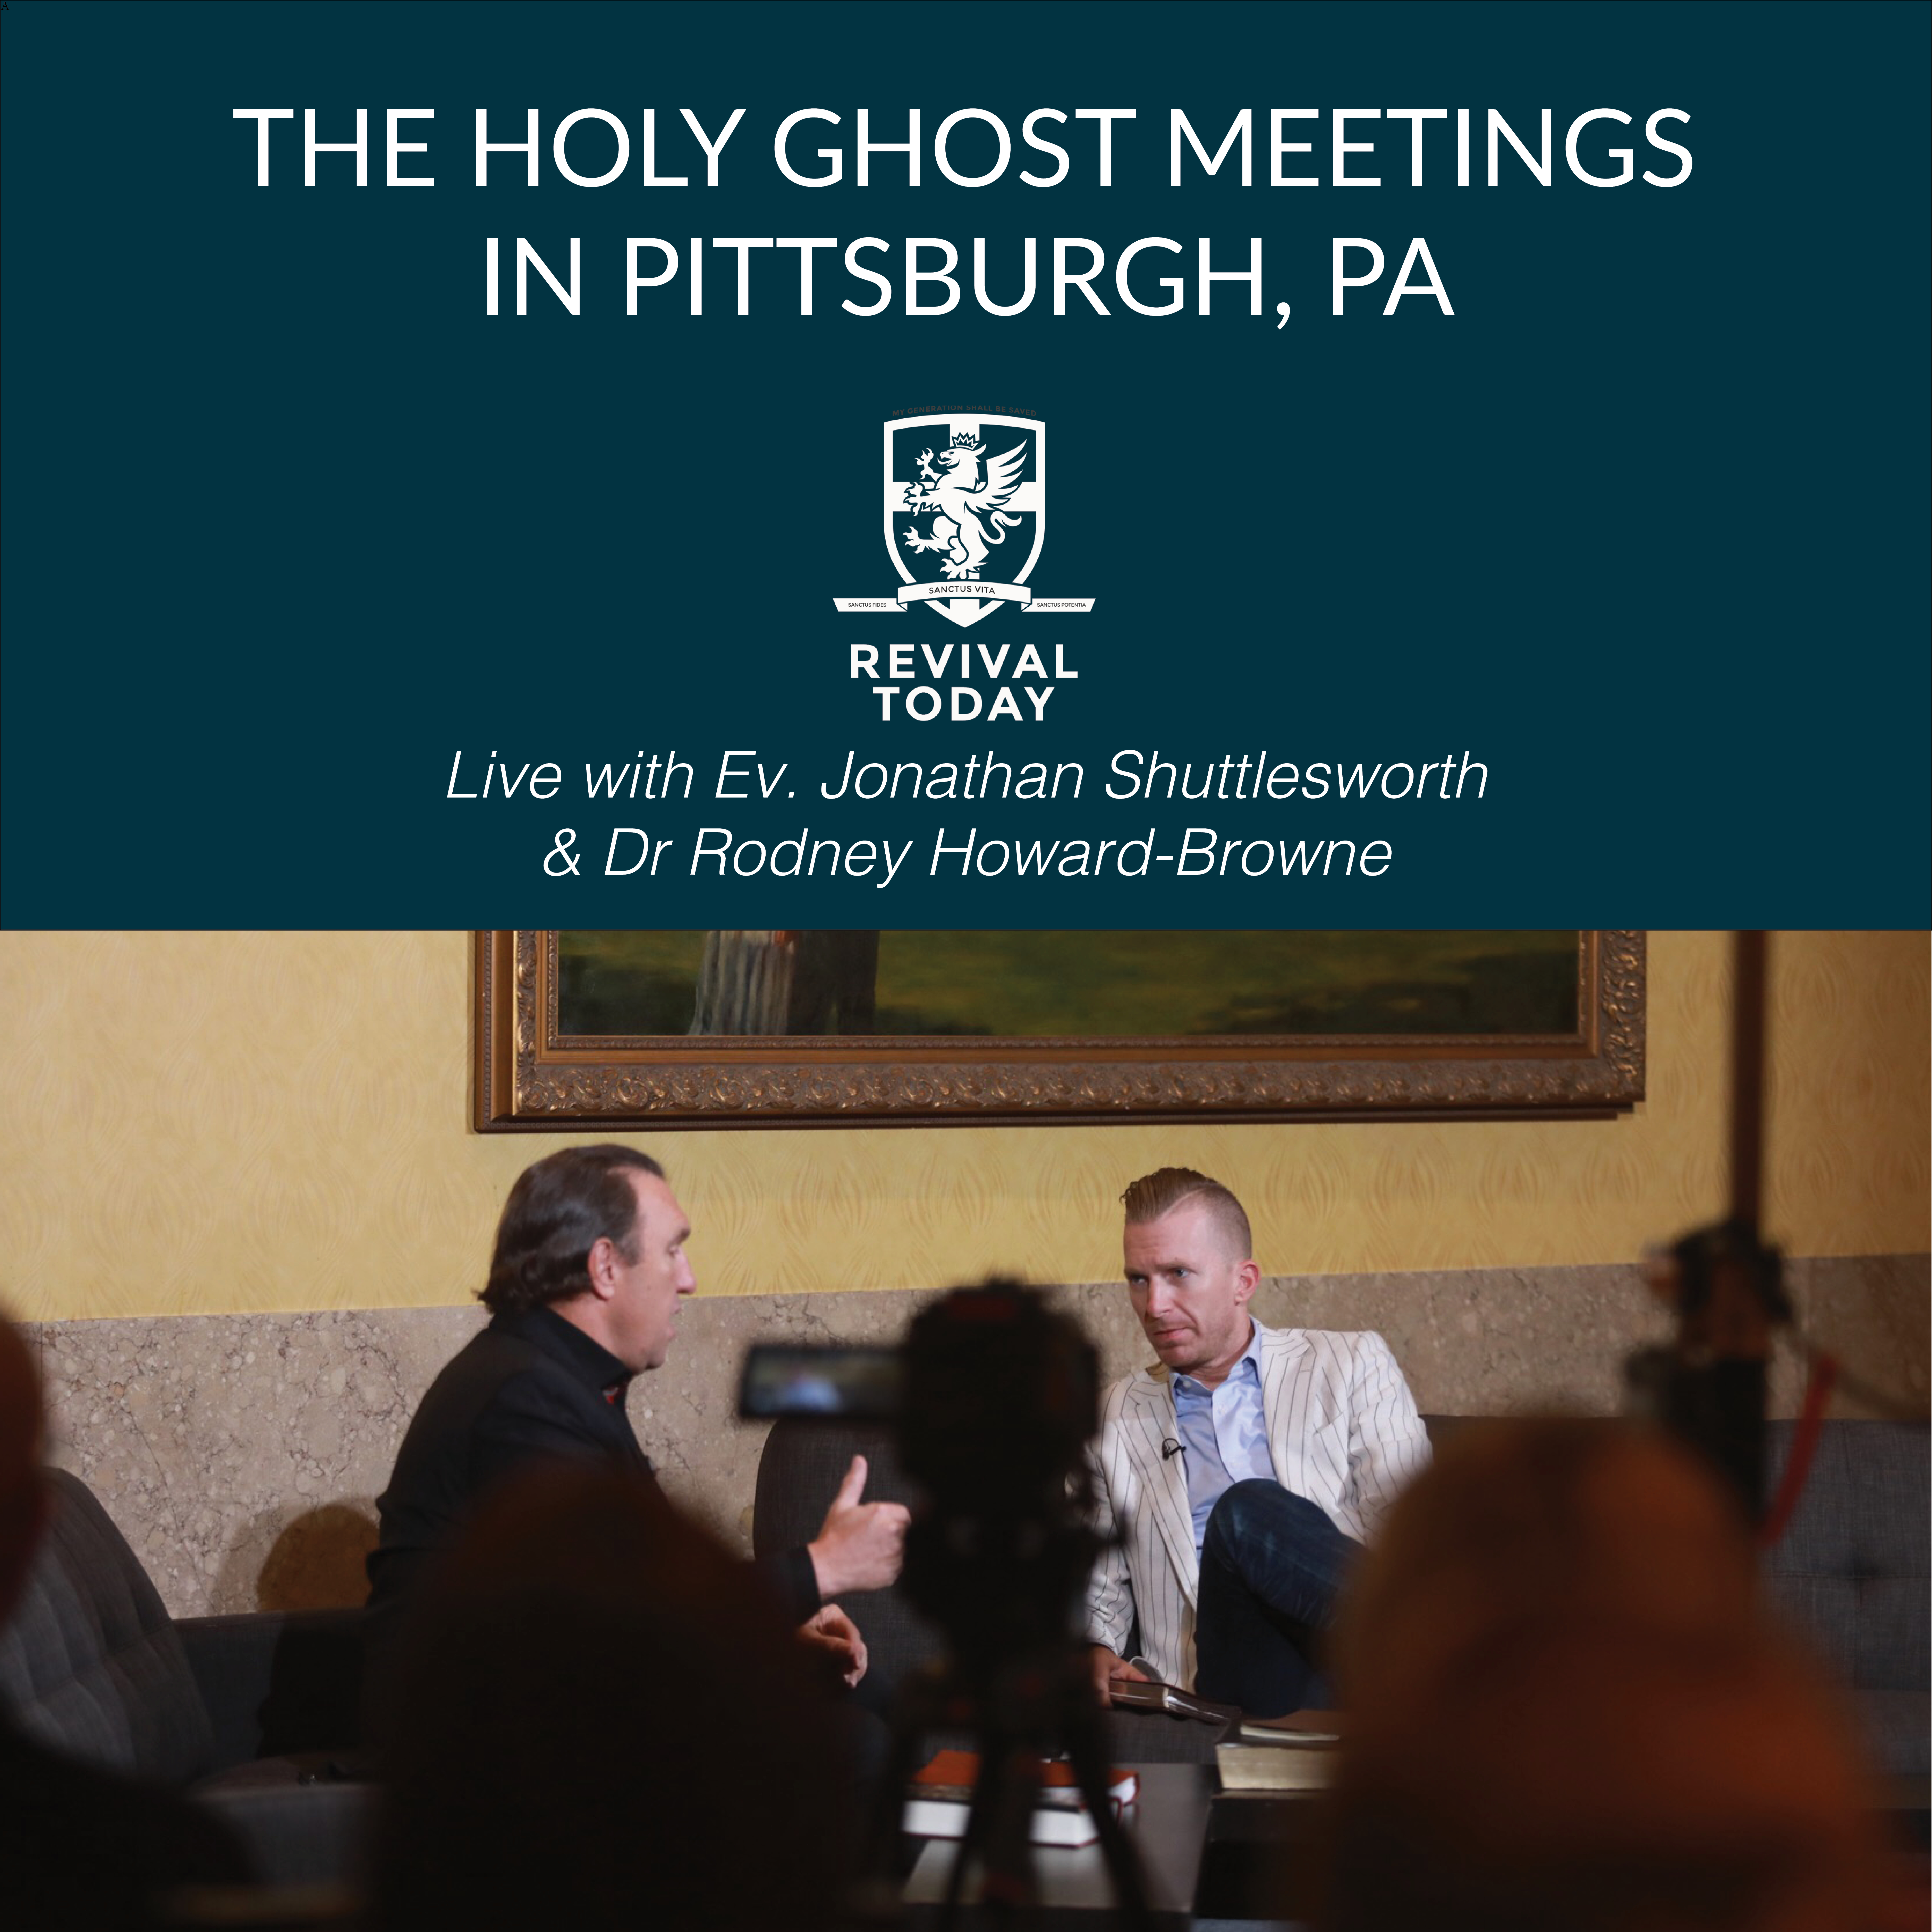 The Holy Ghost Meetings with Jonathan Shuttlesworth and Dr. Rodney Howard-Browne